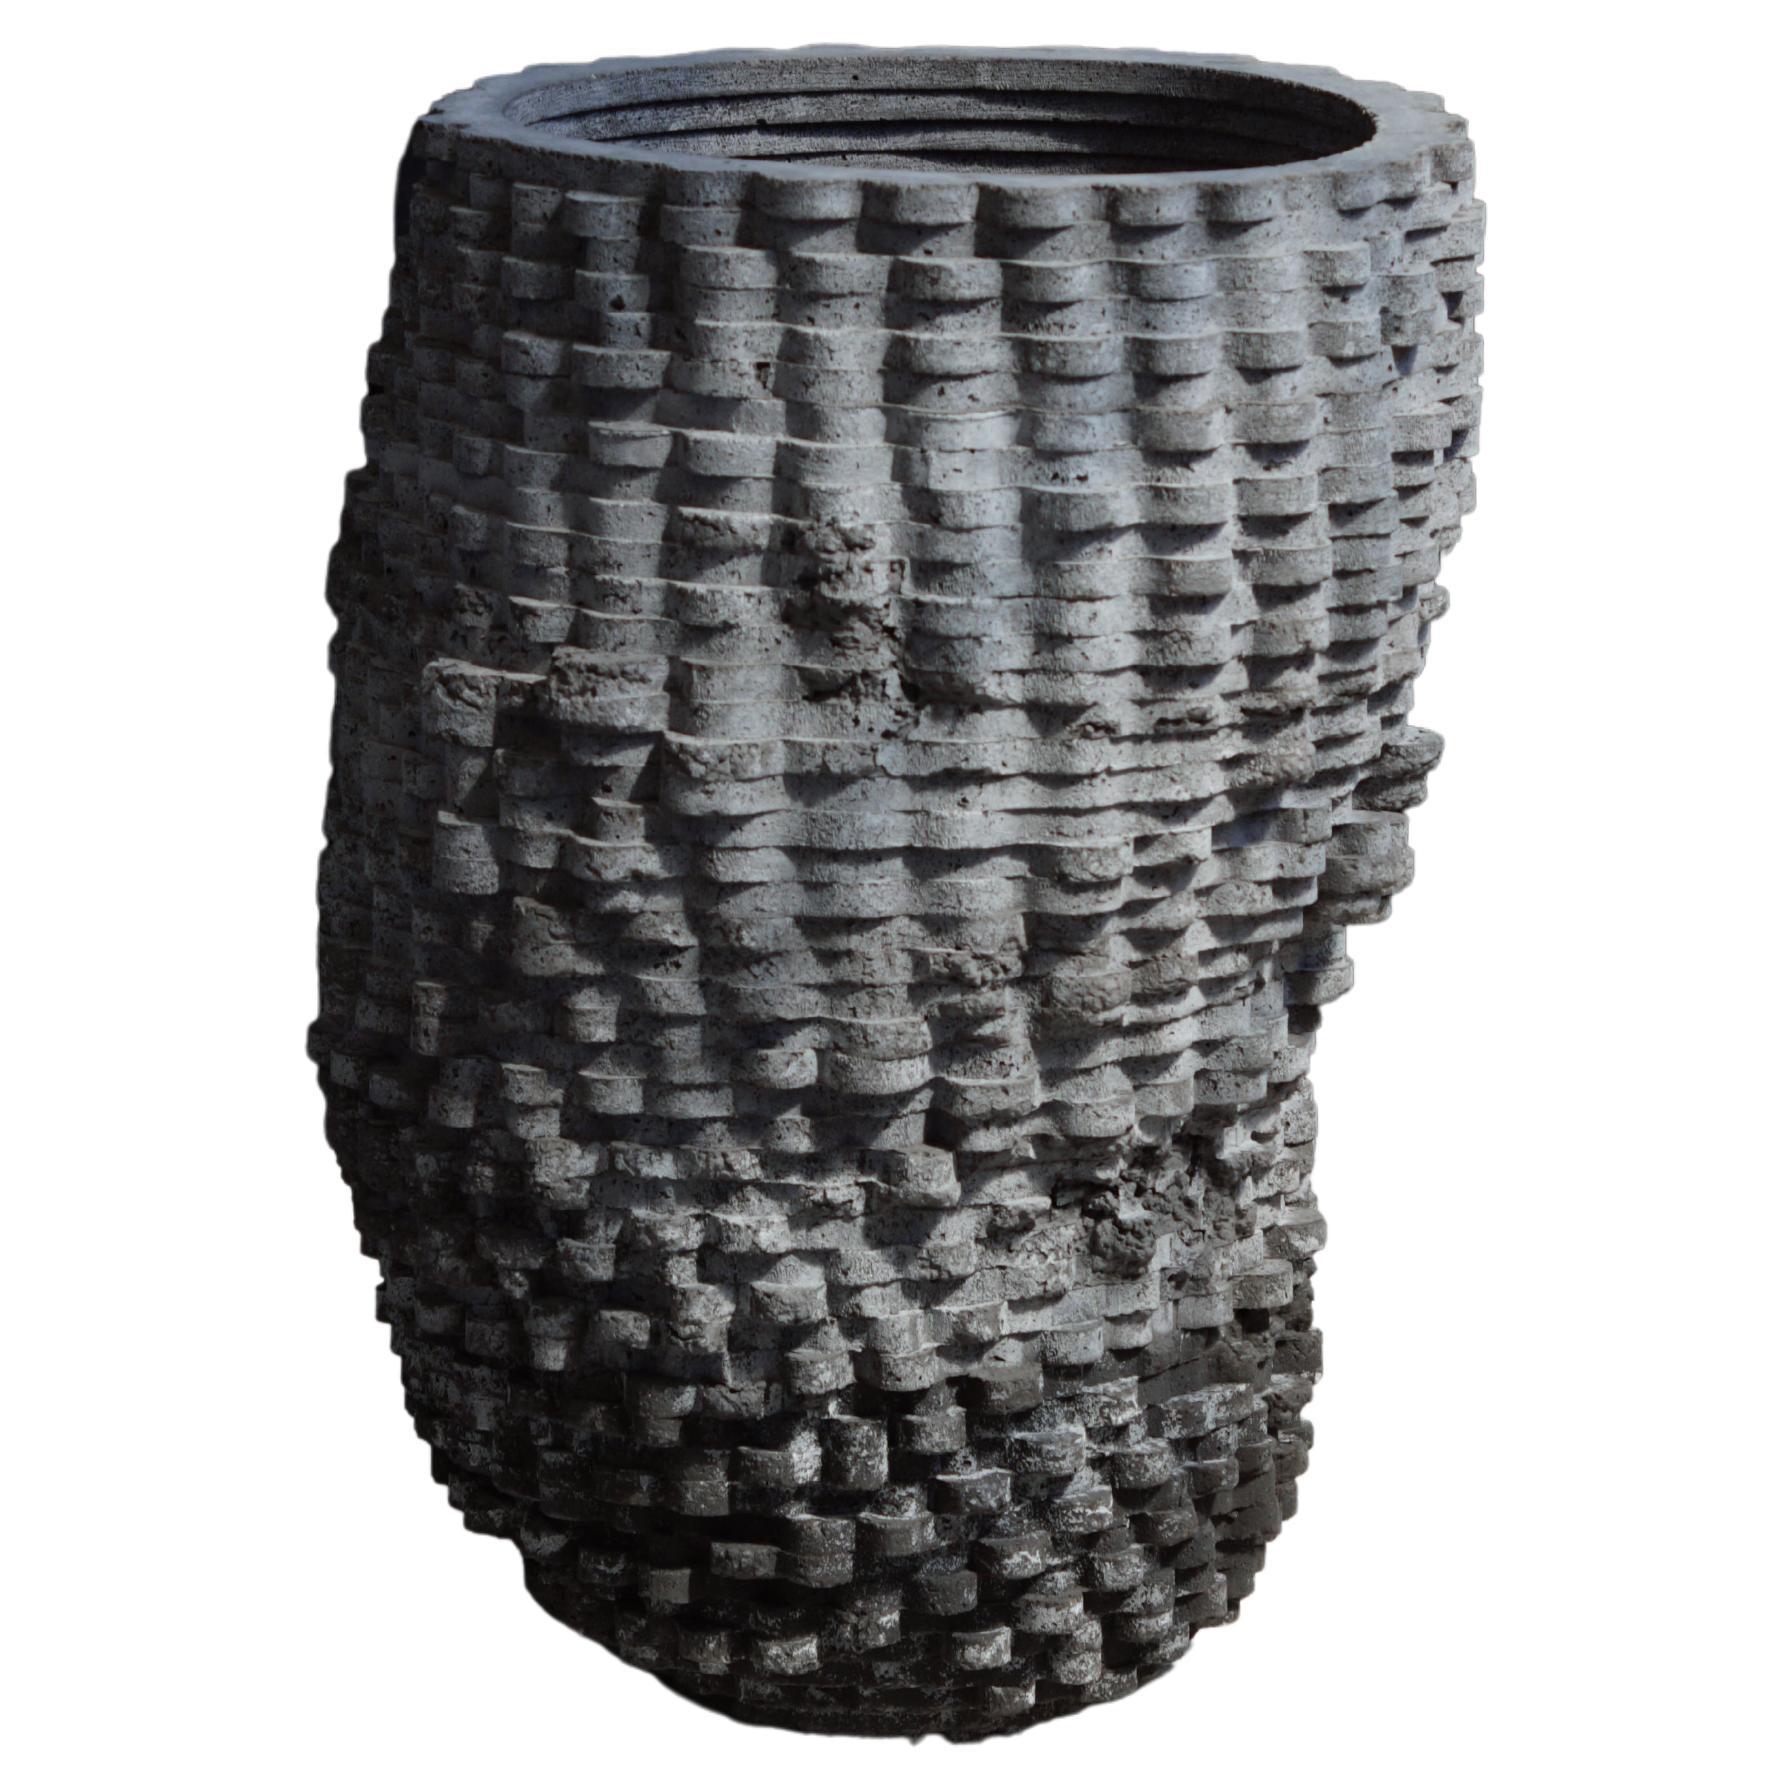 Large vessel for indoor and outdoor use. Can be made with drainage holes.

At the intersection of art, craft, and design, Concrete Poetics' debut collection of hand-cast cement sculptural furniture and accessories streamlines visually intriguing and